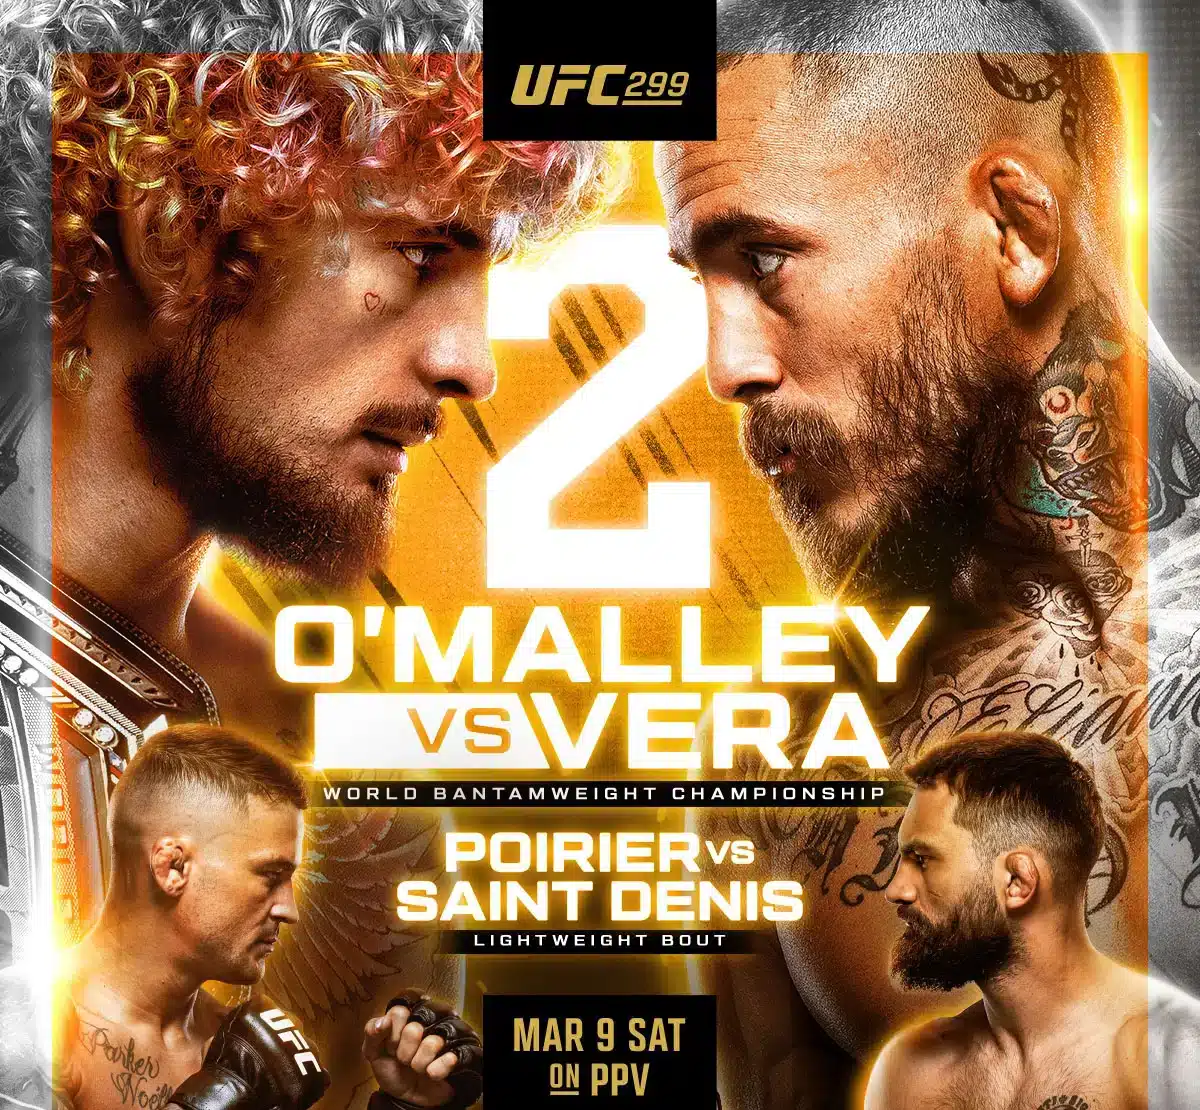 UFC 299 buildup with O'Malley vs Vera Poirier vs Saint-Denis in this poster